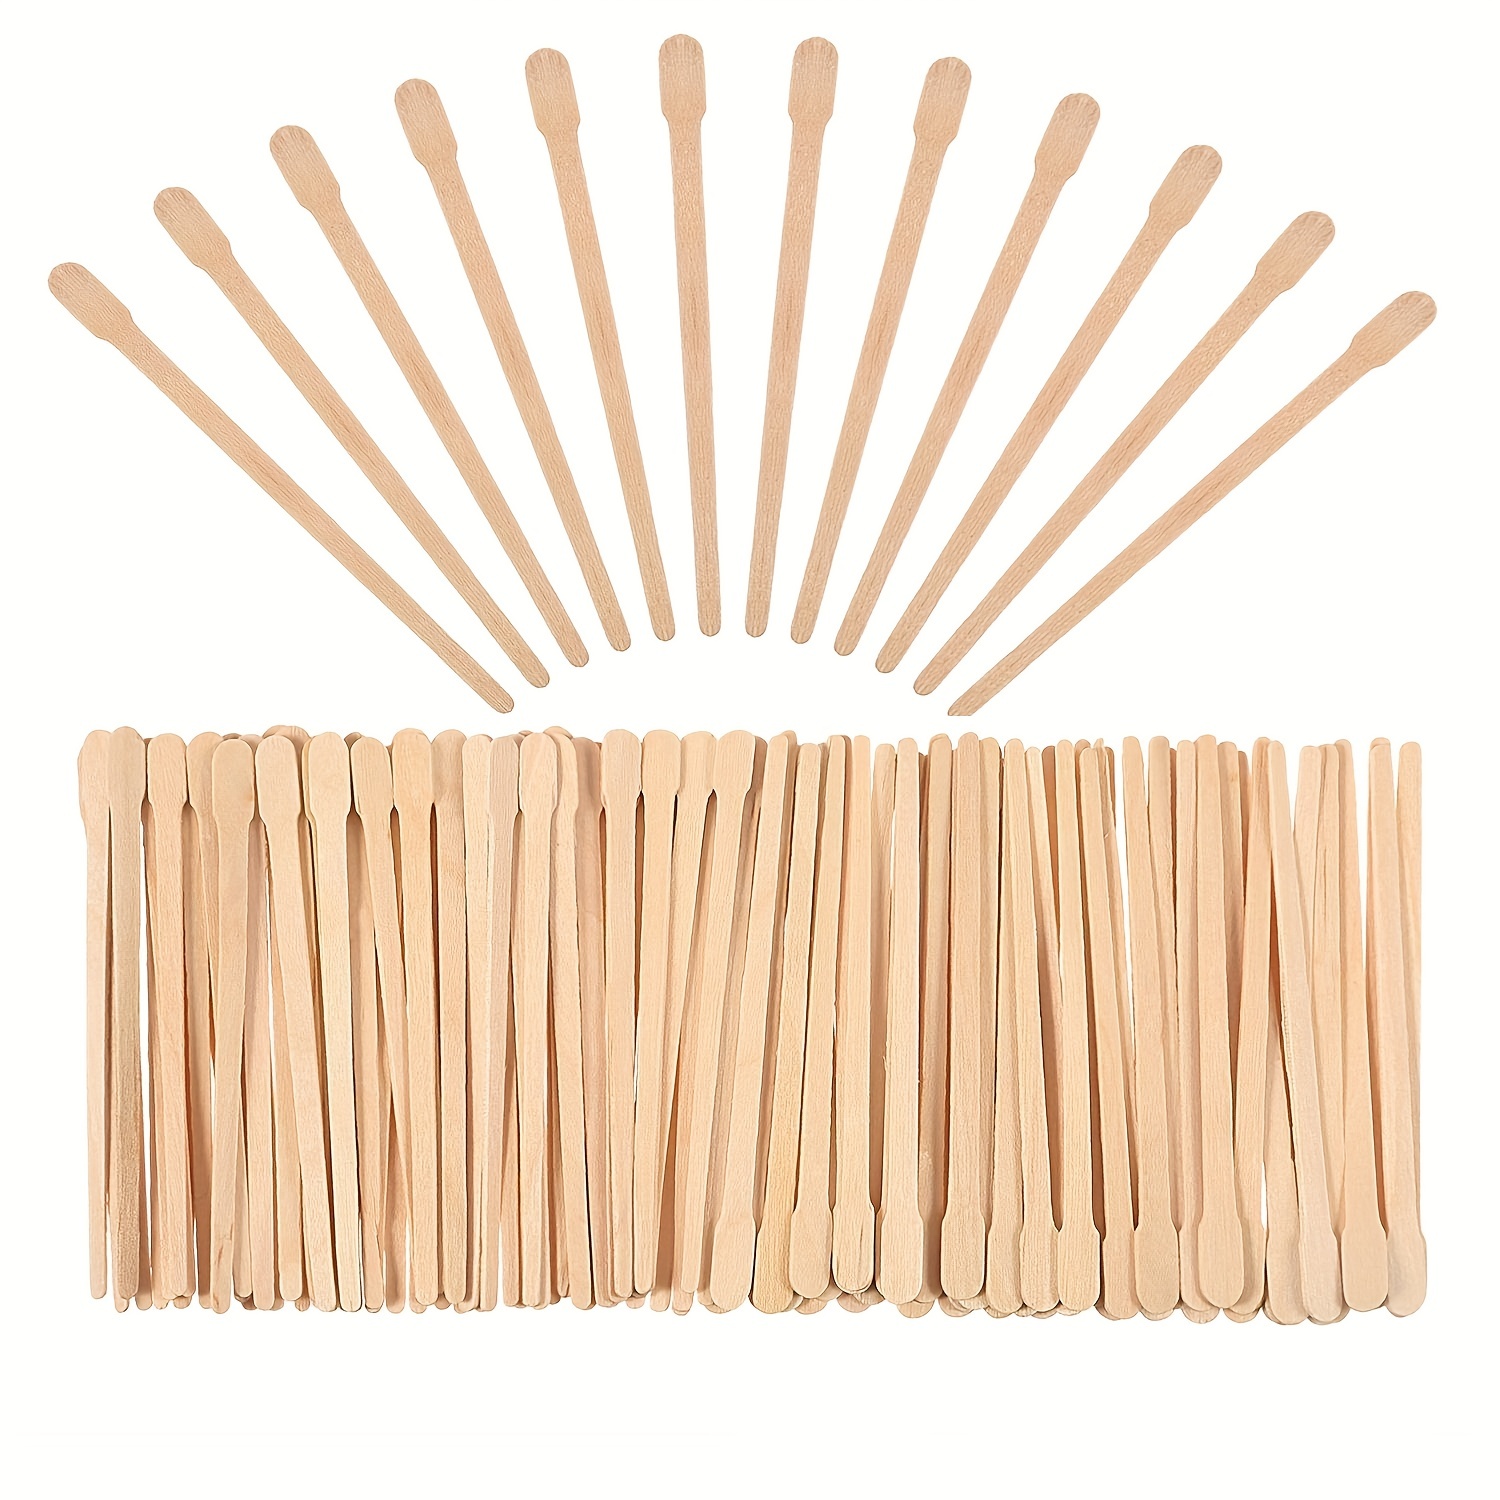  Bella Verde Wooden Wax Applicator Sticks and Non-Woven White  Wax Strips - Wooden Waxing Spatulas - Large - 400 count - Hair removal -  For Men - Women - Brazilian Eyebrow